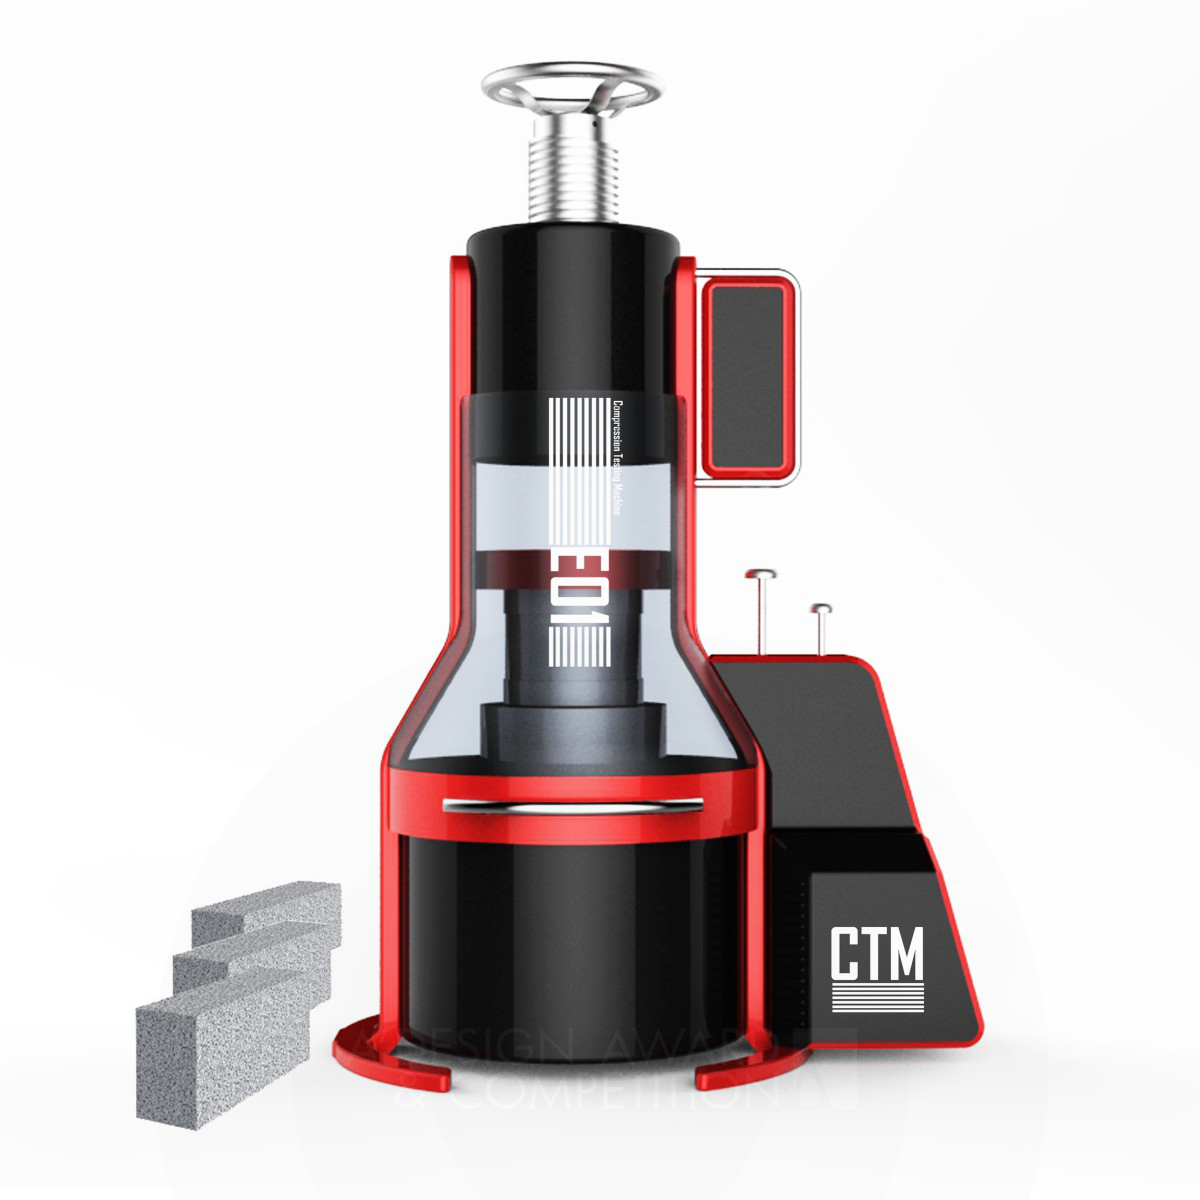 CTM Compression Testing Equipment by Universal Designovation Lab LLP Silver Scientific Instruments and Research Equipment Design Award Winner 2016 